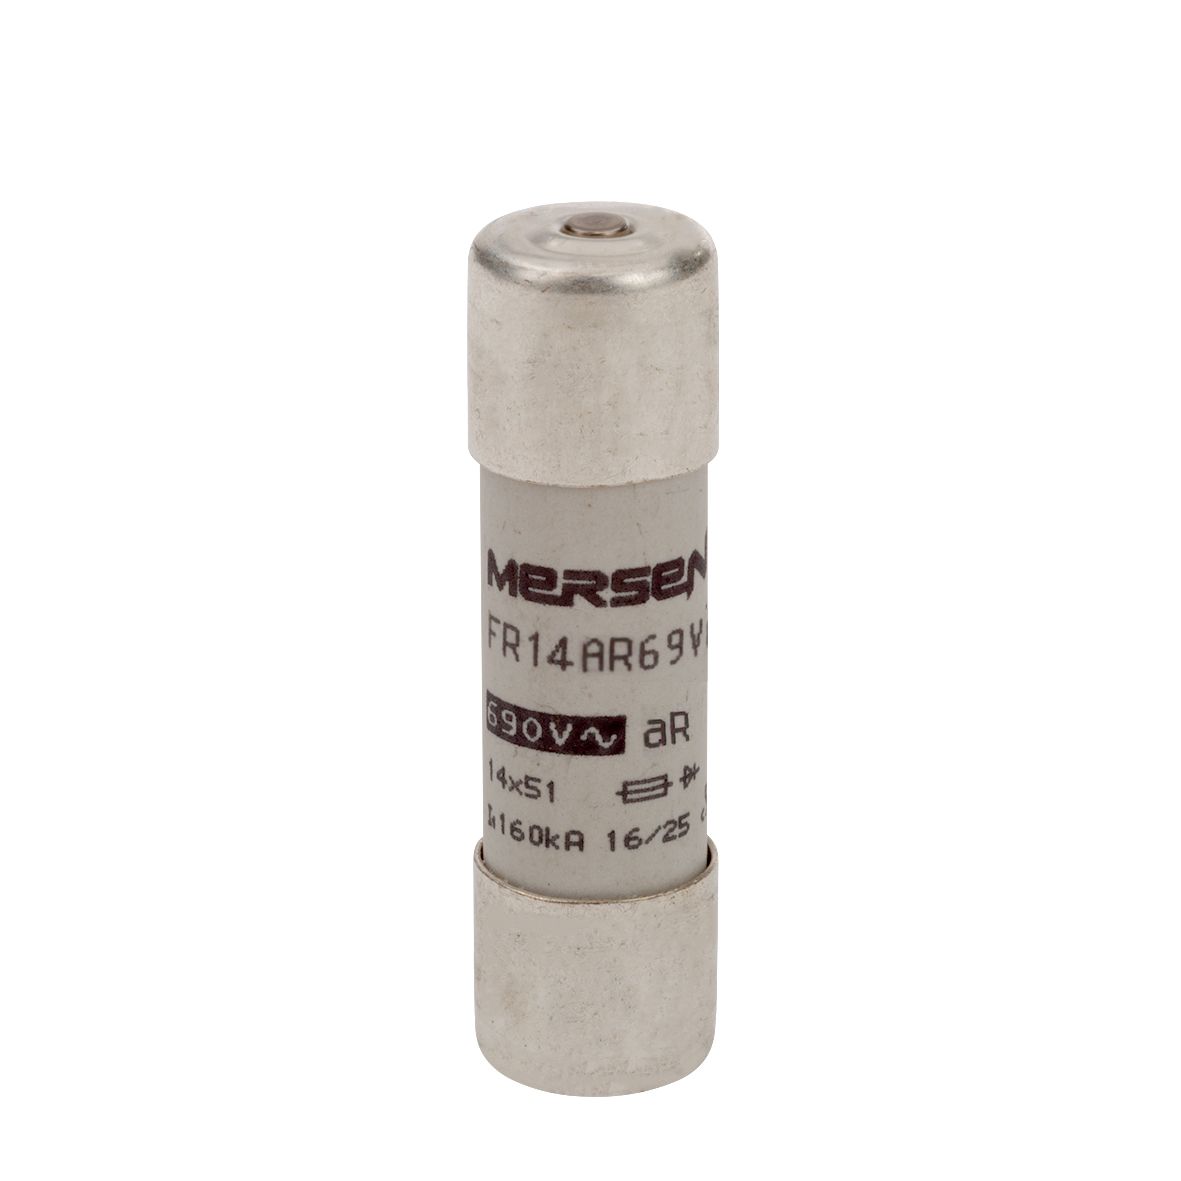 W1056662 - Cylindrical fuse-link aR 690VAC 14x51, 25A, with indicator